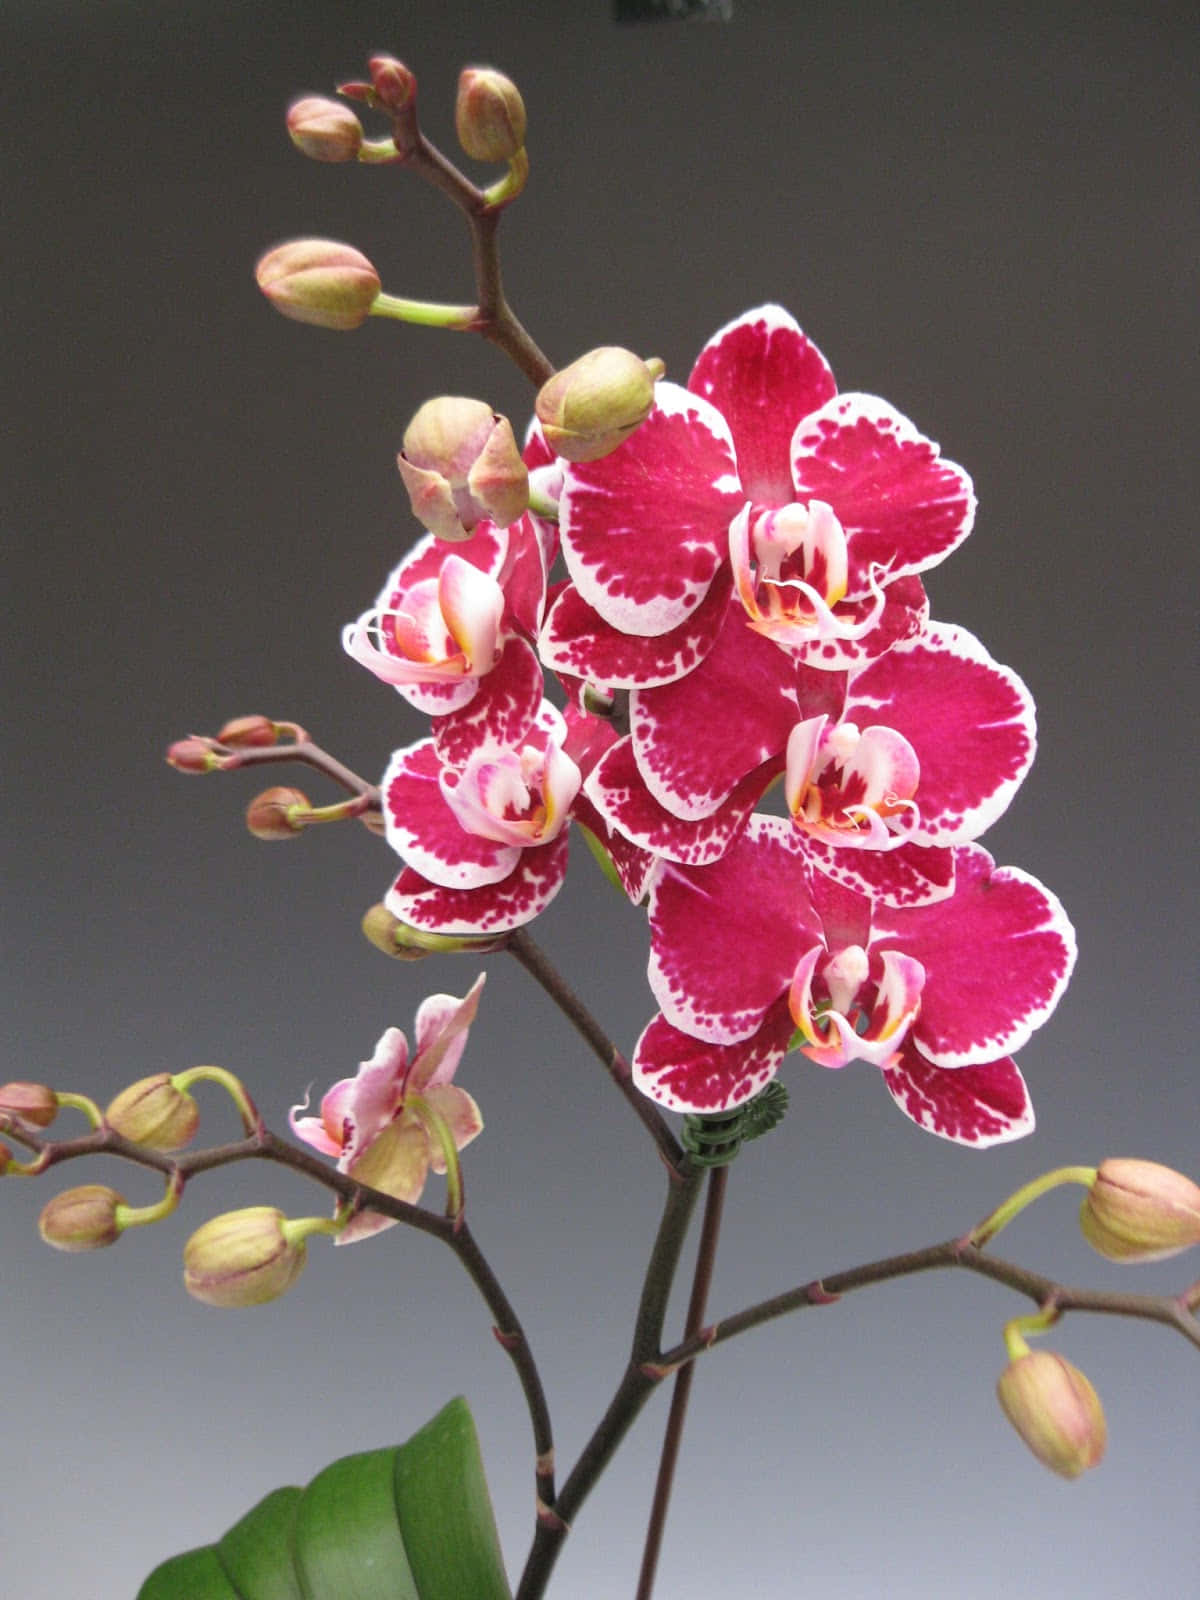 'A beautiful pink orchid blooming in the garden.'